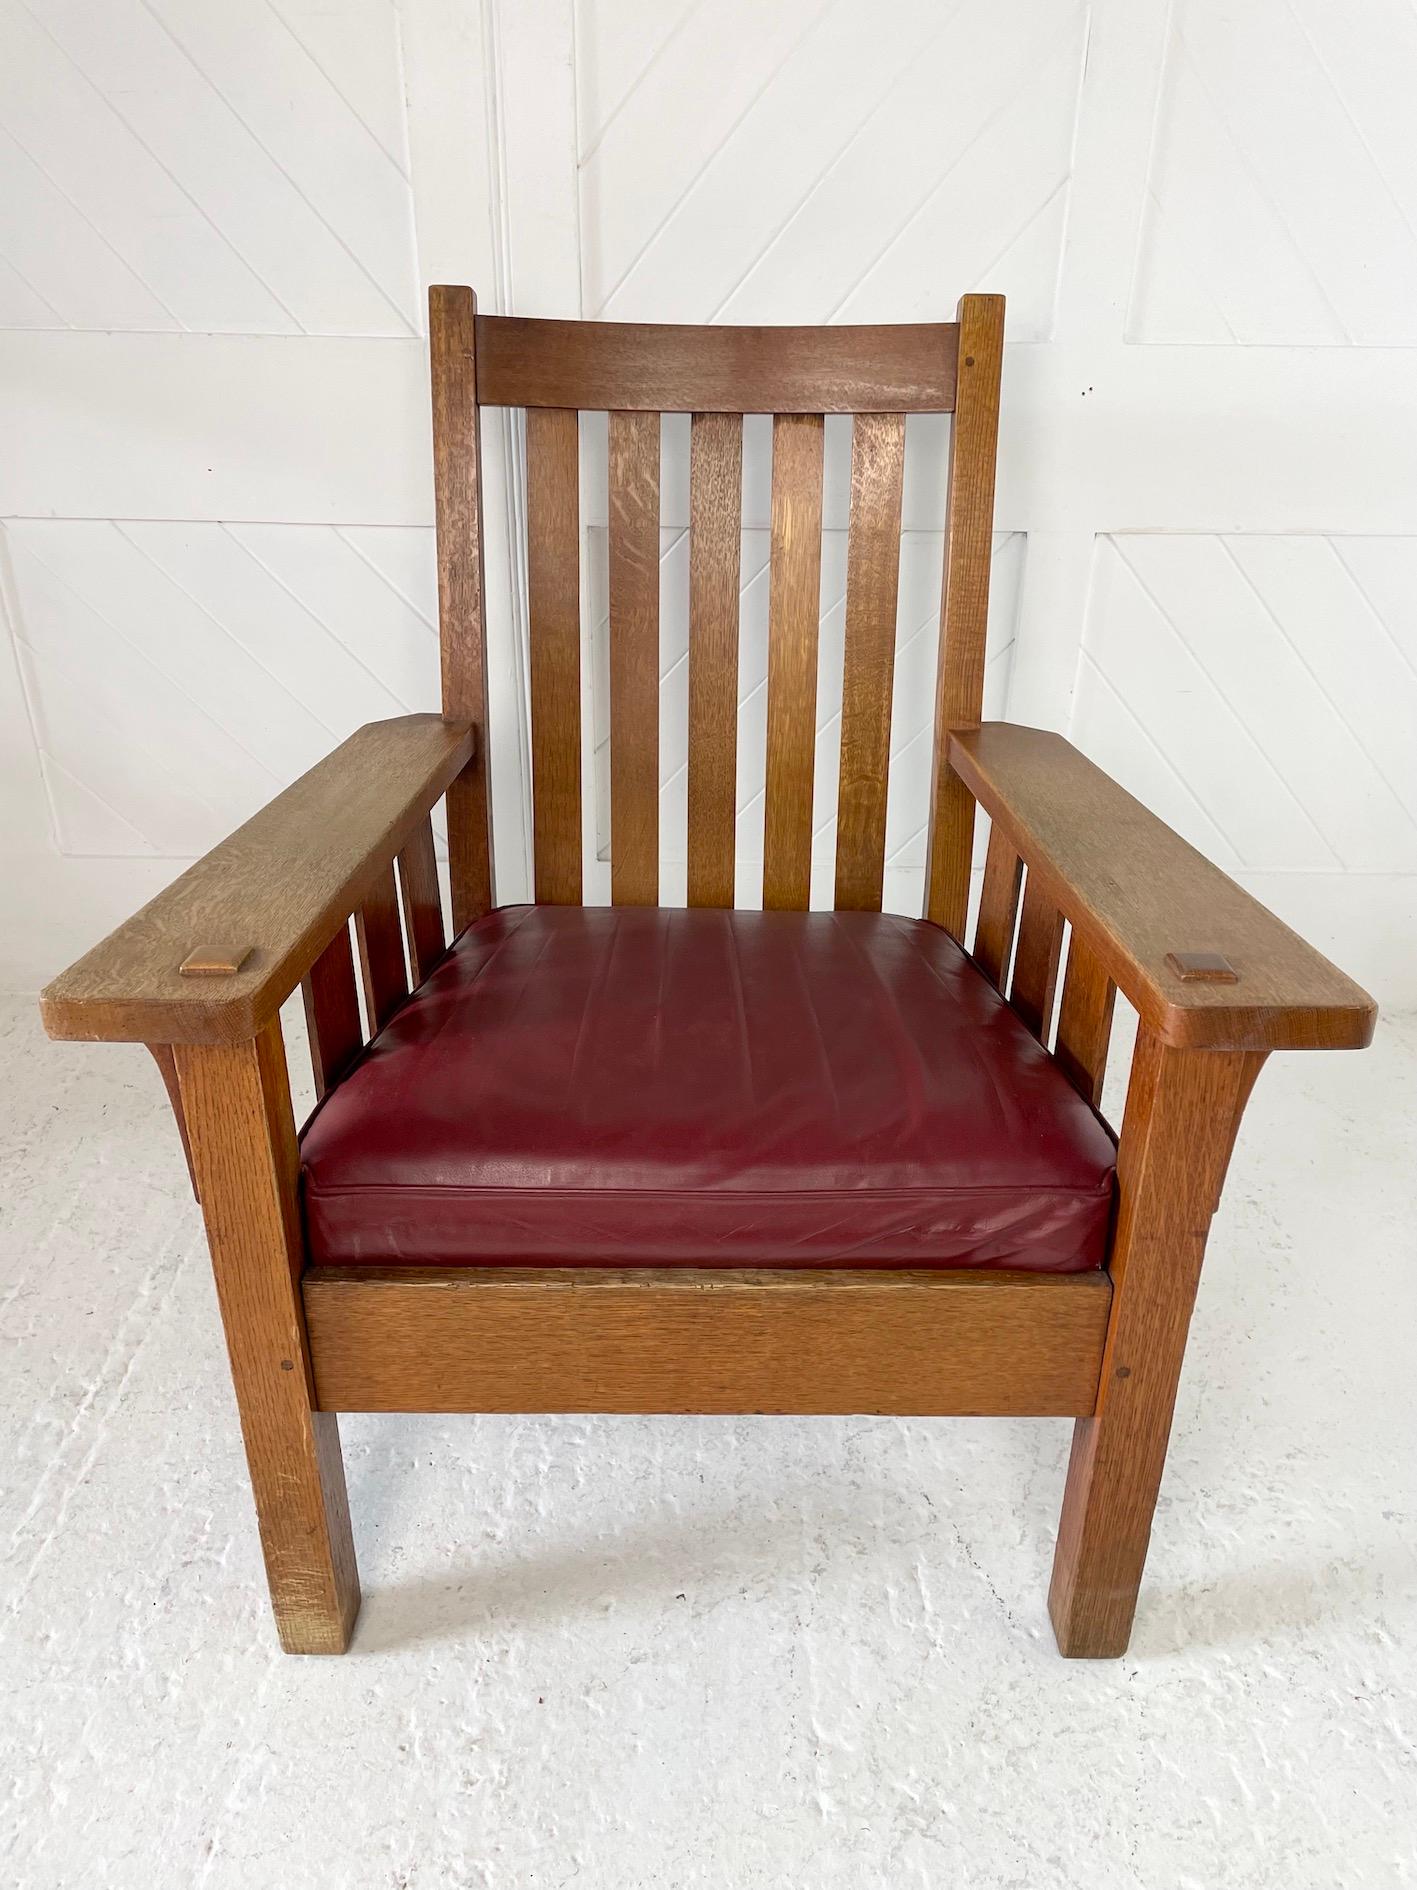 American Arts & Crafts oak over-sized armchair
Through tenon detailing and slatted back
Currently upholstered in maroon leather
Attributed to Gustav Stickley
Circa 1900
Height 103cm Depth 80cm Width 88cm
Seat Height 48cm

Gustav Stickley (1858-1942)